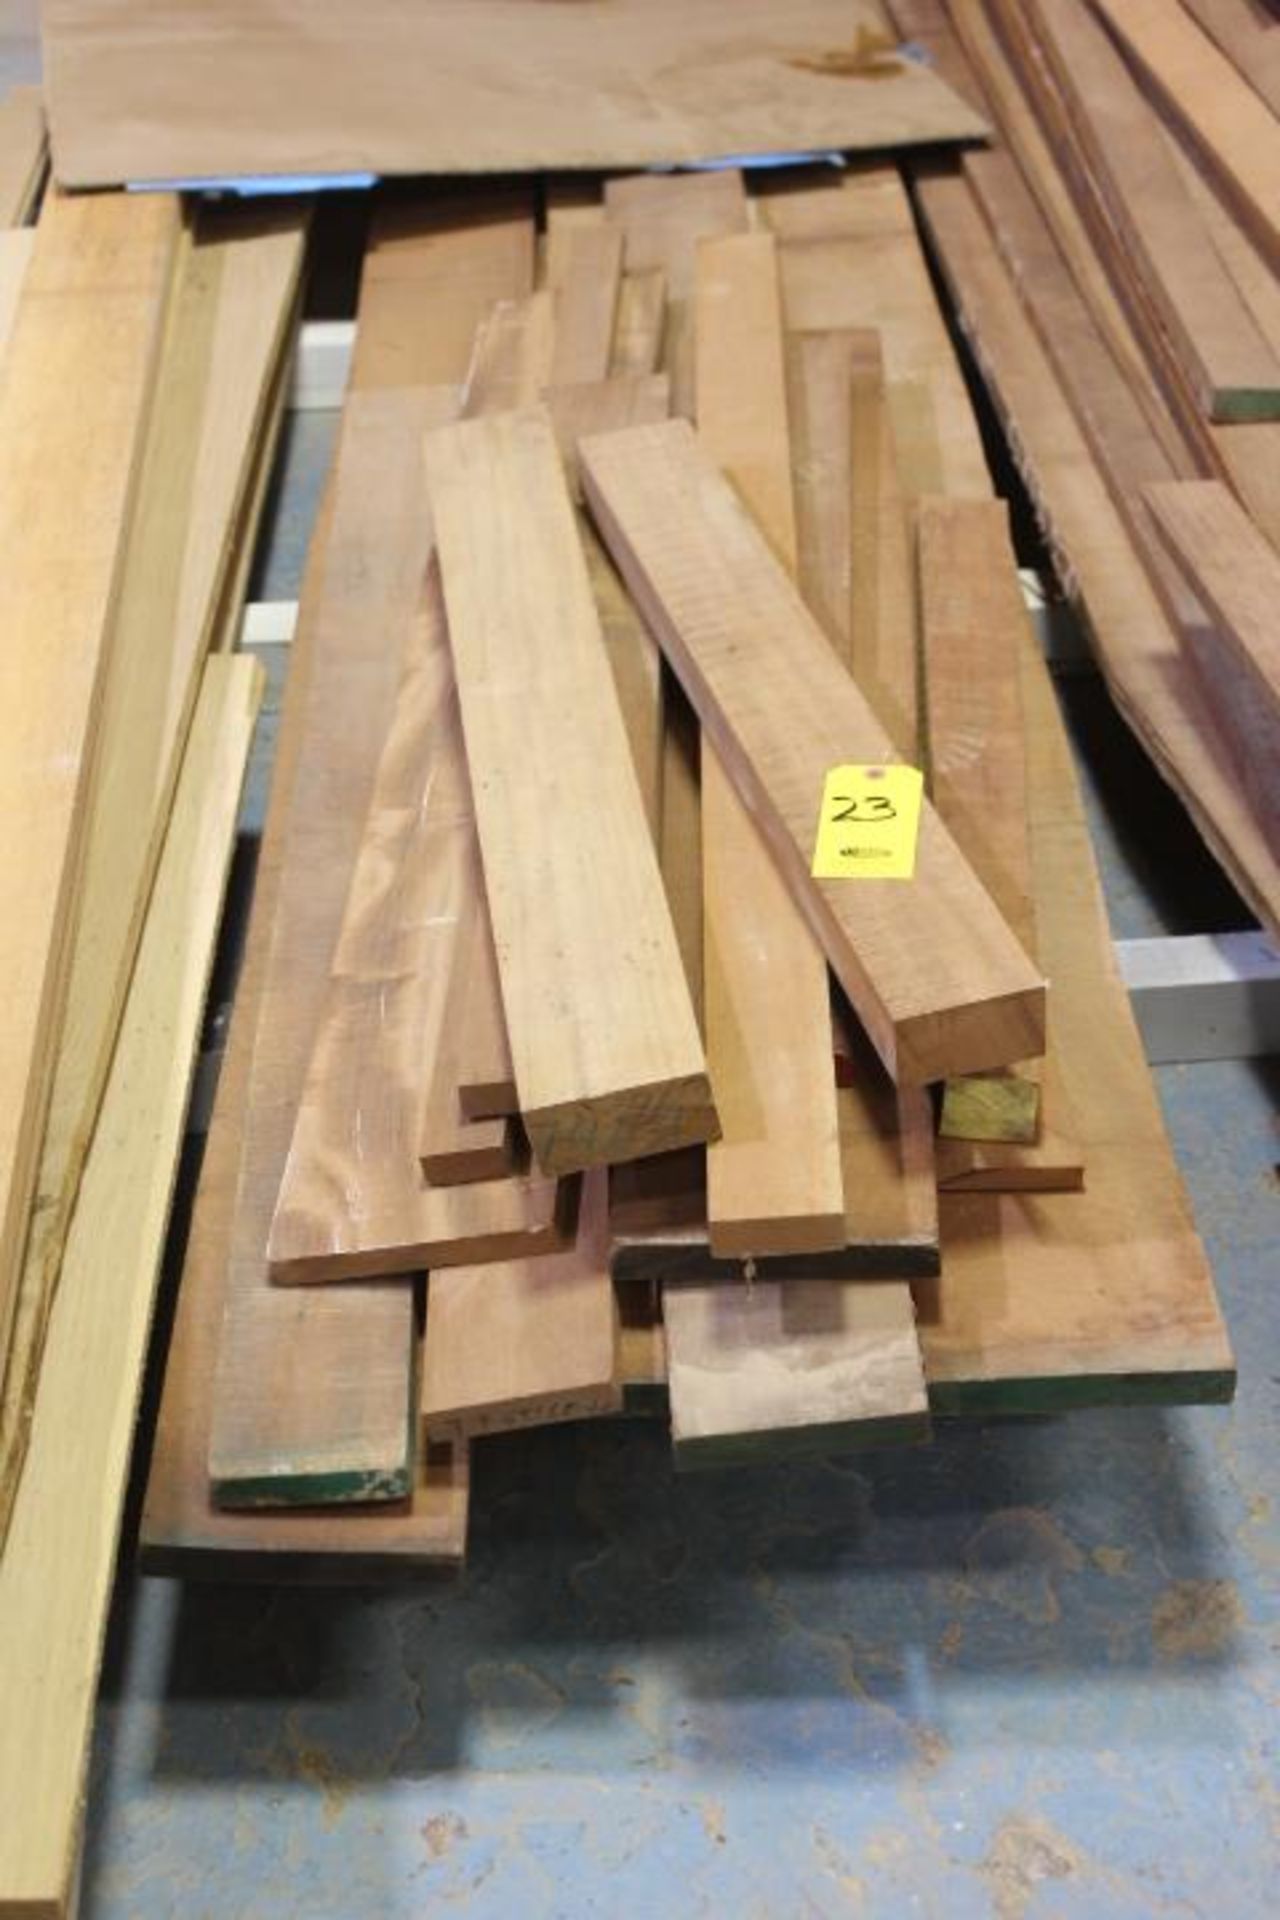 4/4 SAPELE APPROX 6 FT. LENGTHS APPROX 80 BF